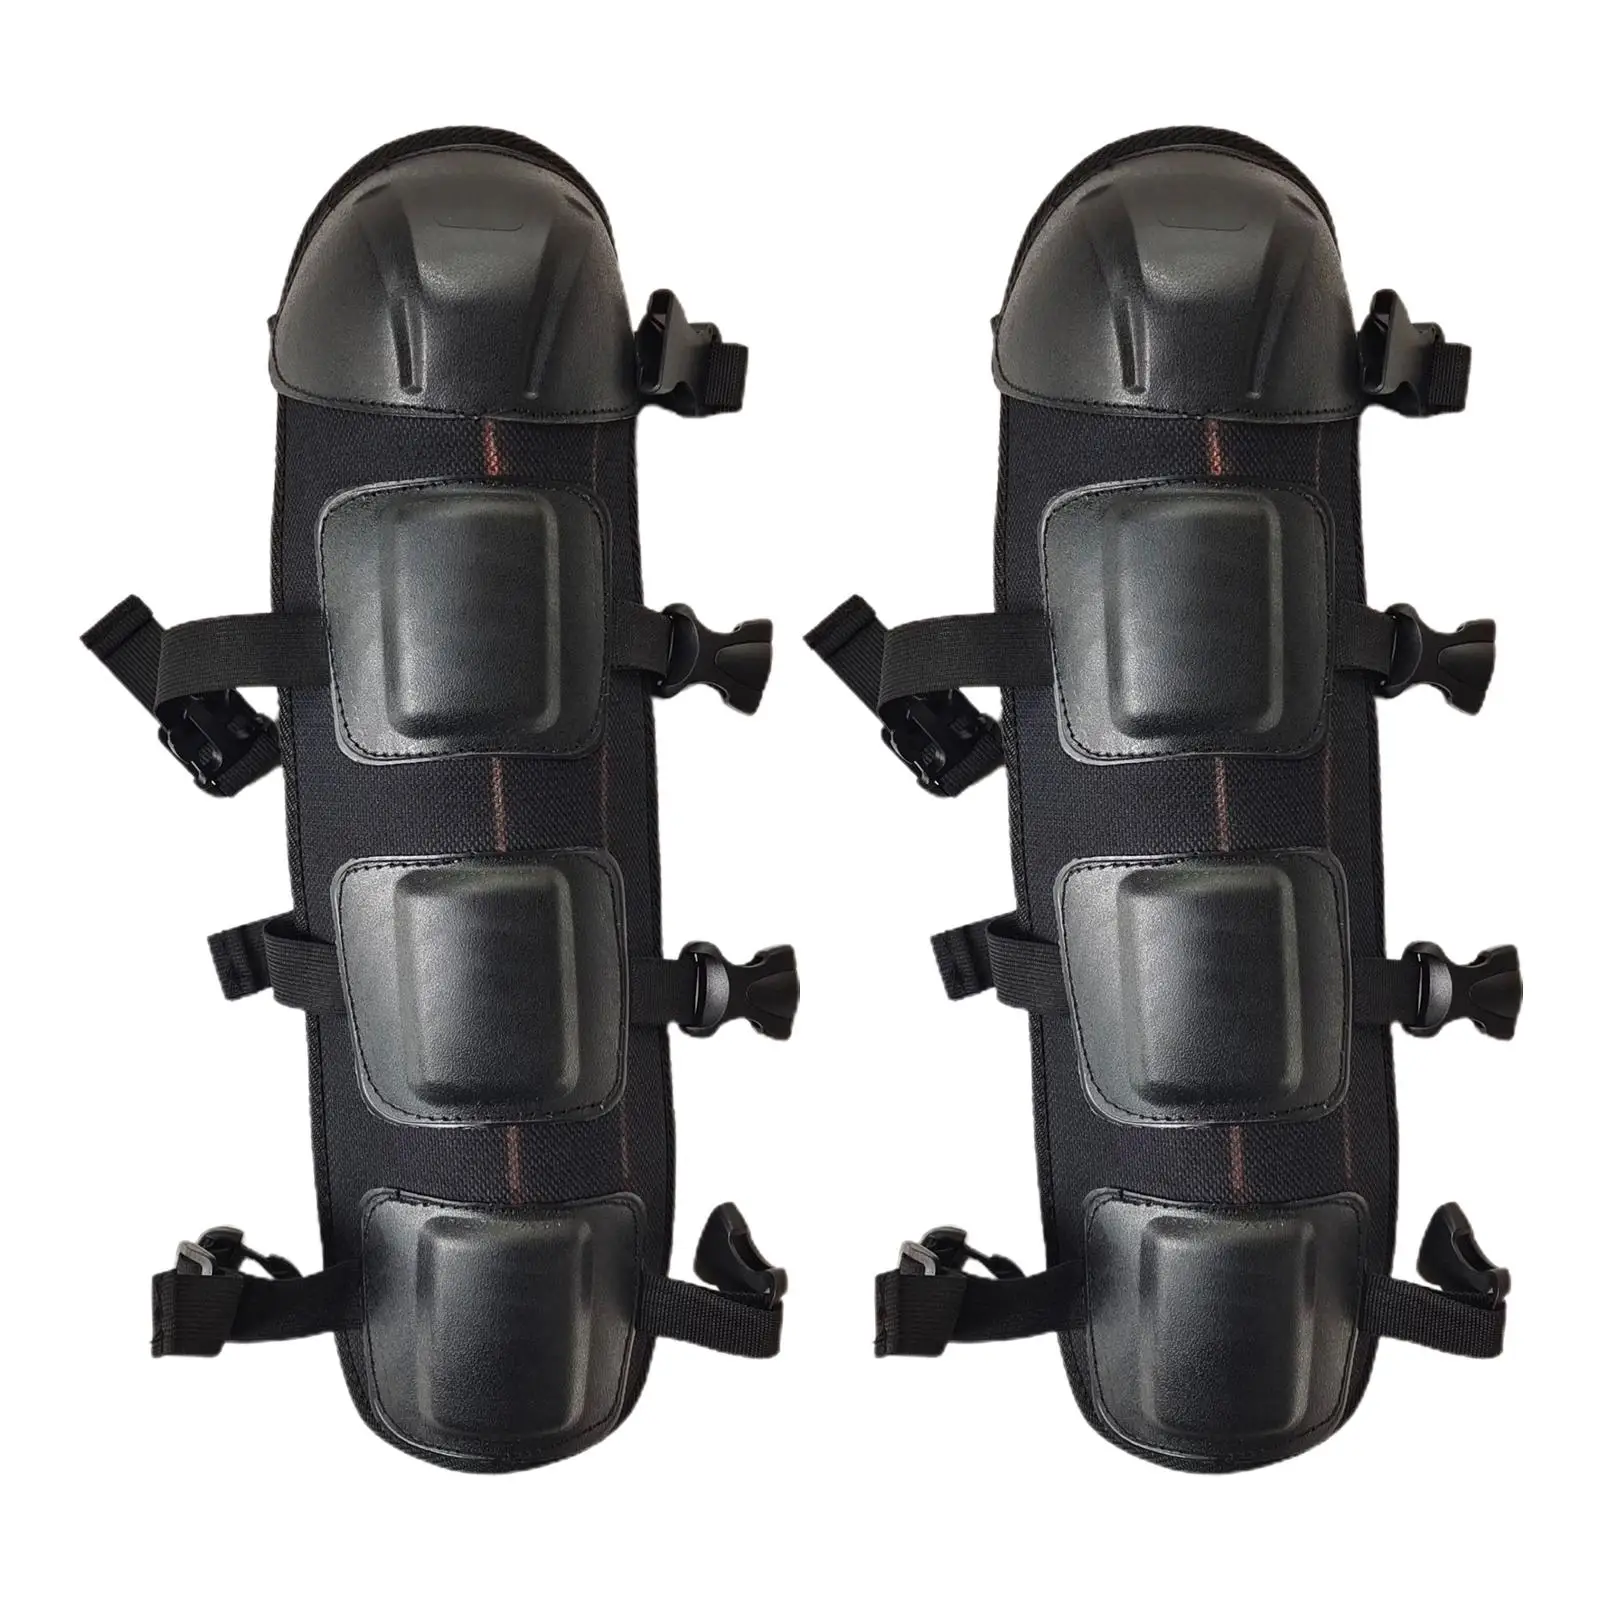 Work Knee Pads Kneelet Protective Gear Protector Pad Soft Motorcycle Knee Shin Guards for Riding Scooter Garden Ski Equipment